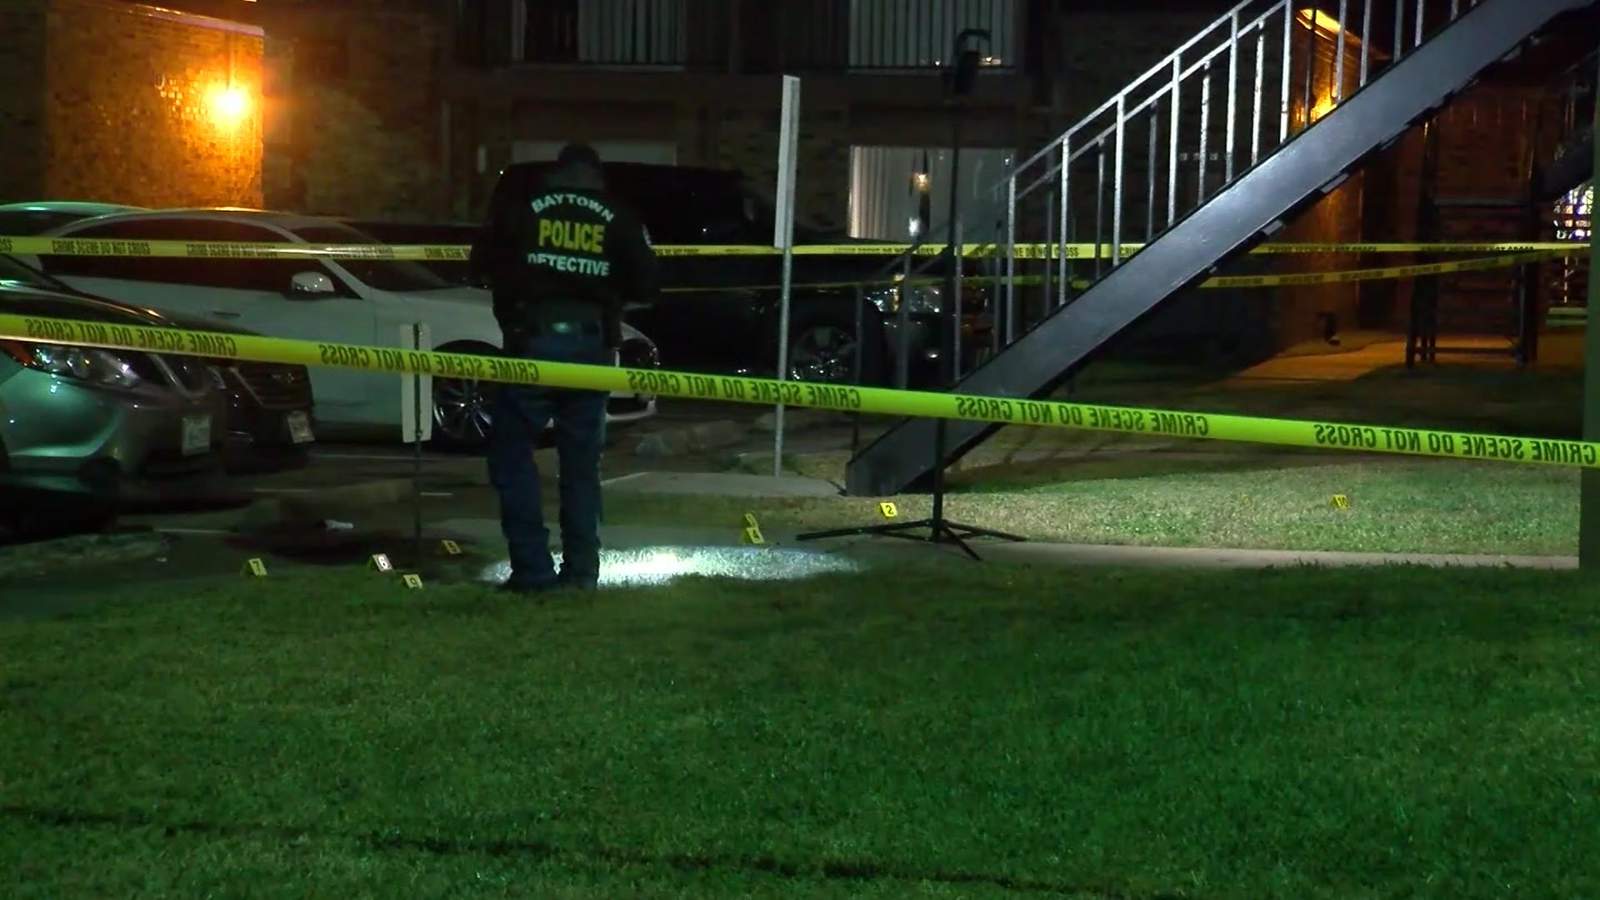 Man shot to death at Baytown apartment complex